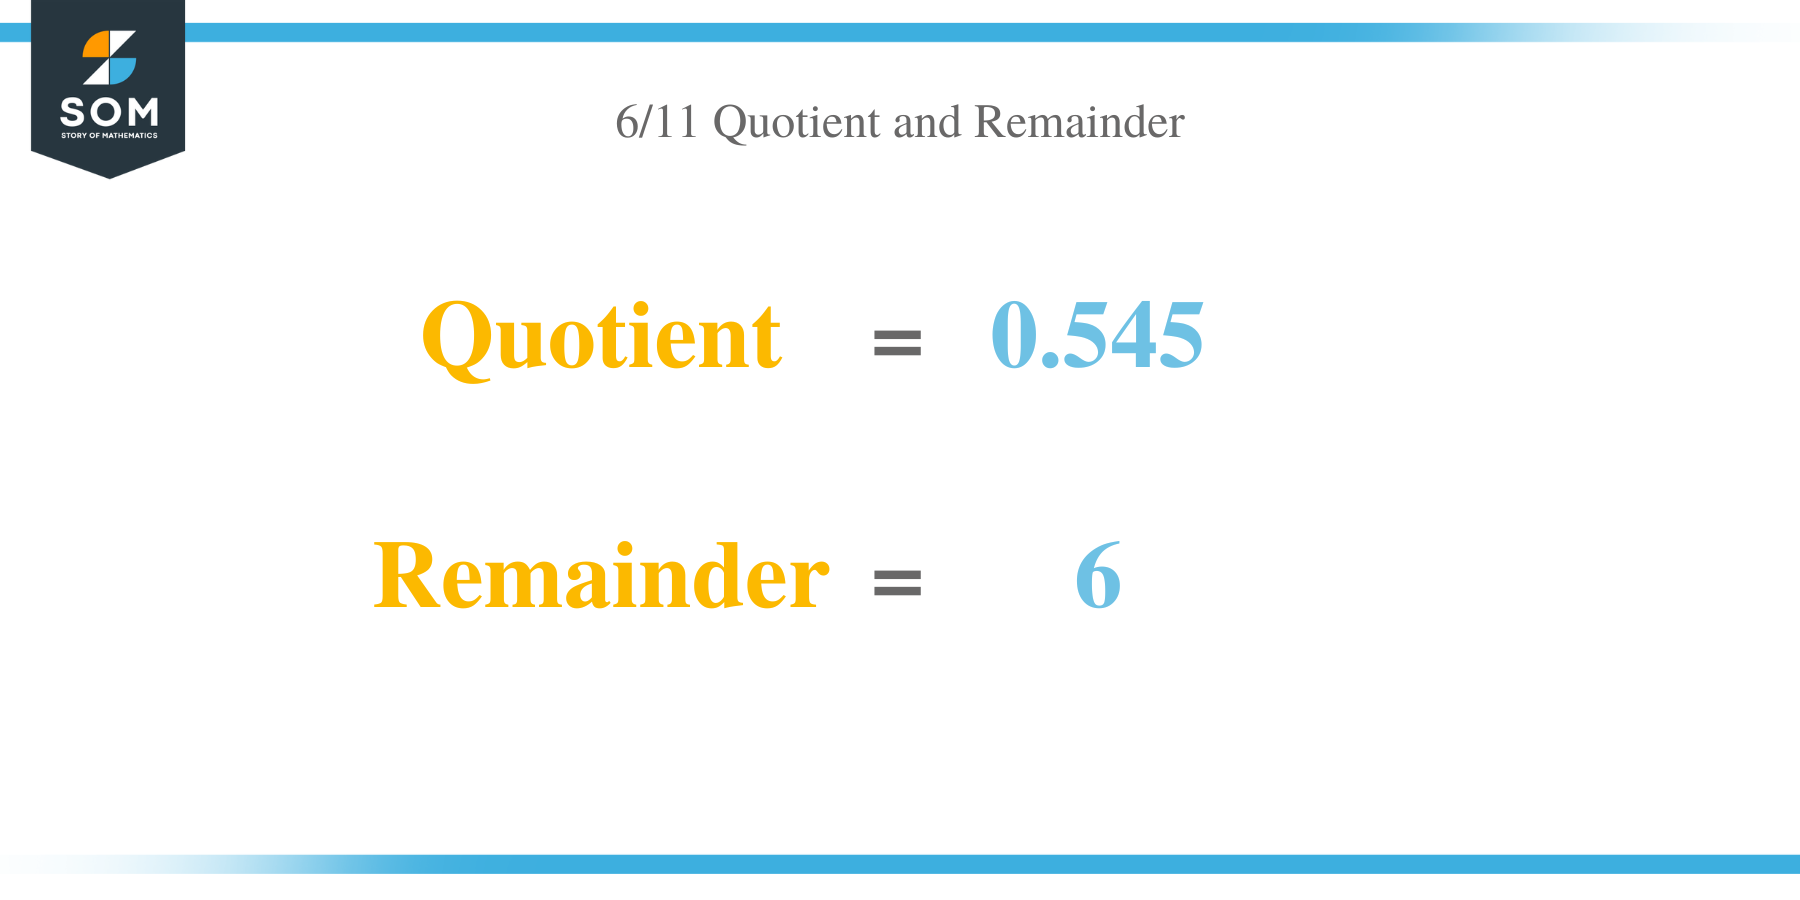 Quotient and Remainer of 6 per 11